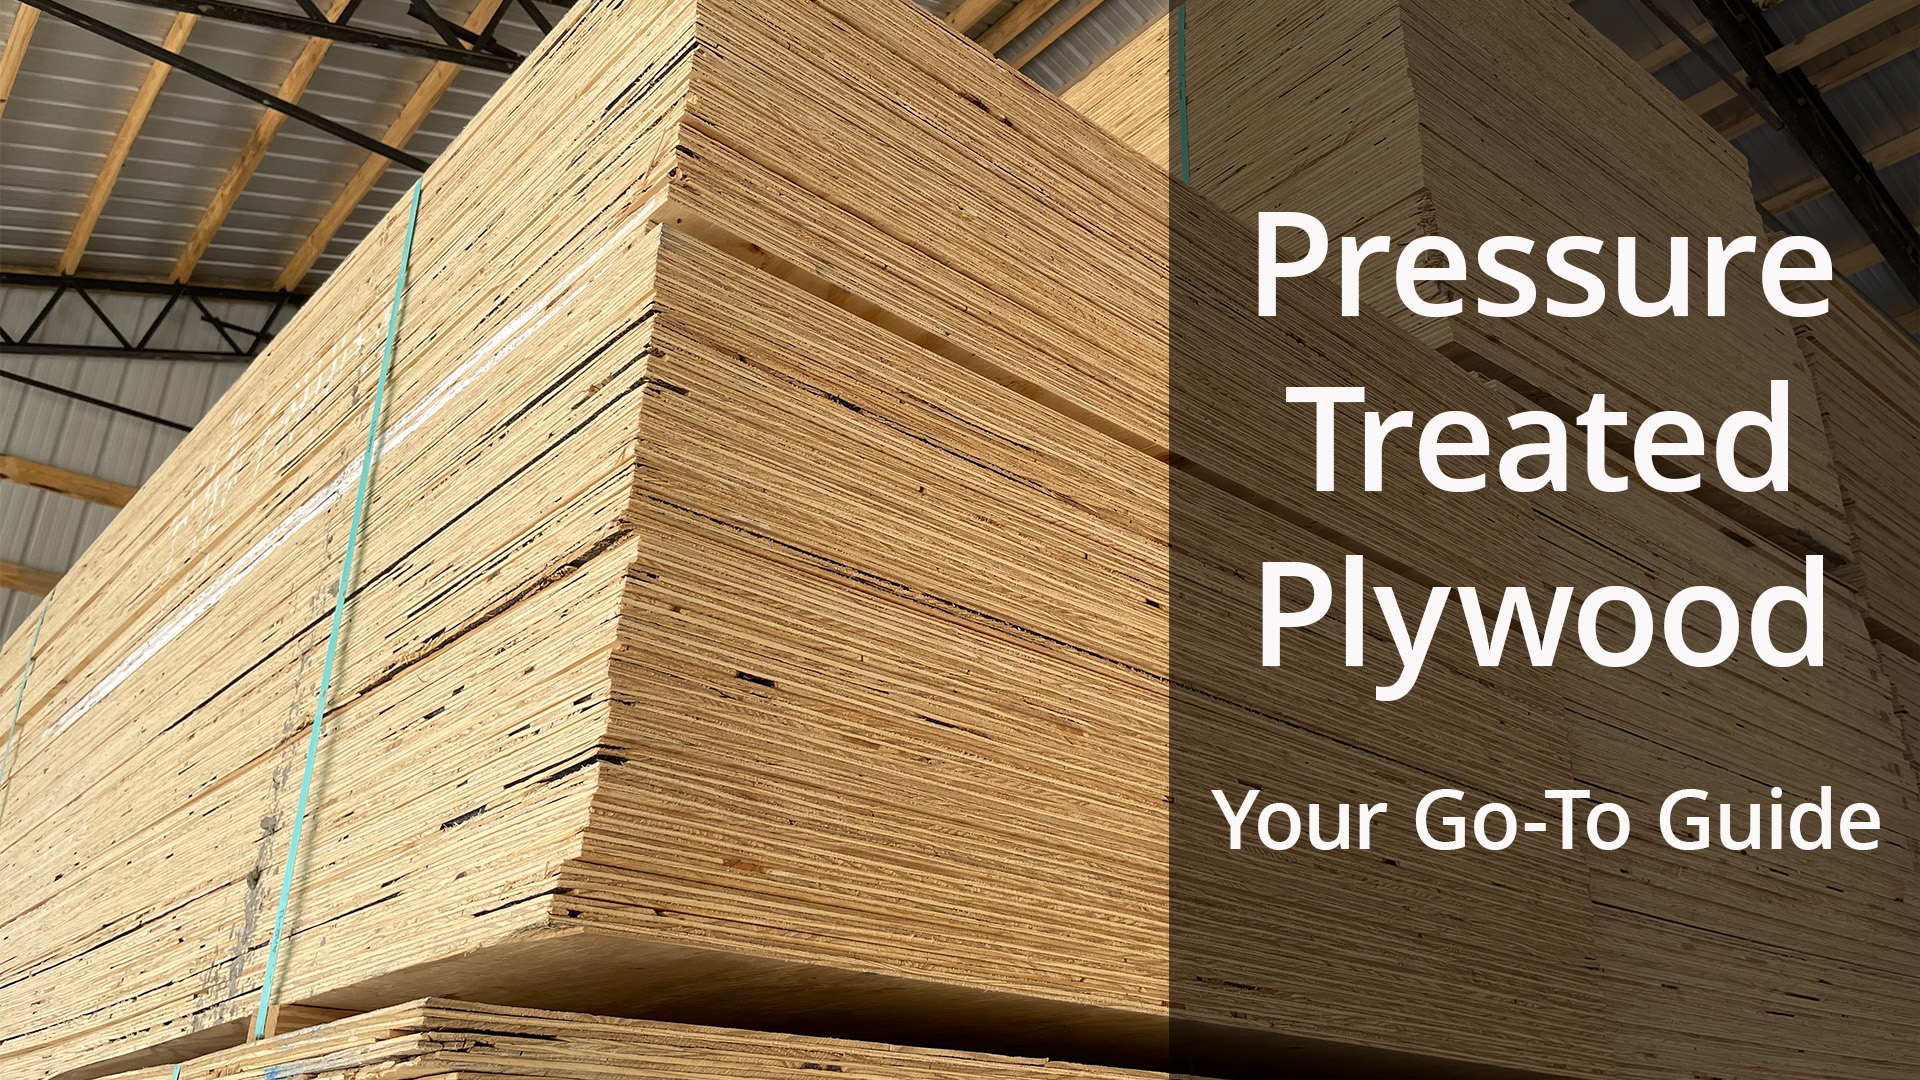 How Long Does Pressure Treated Wood Take To Dry: Quick Guide
